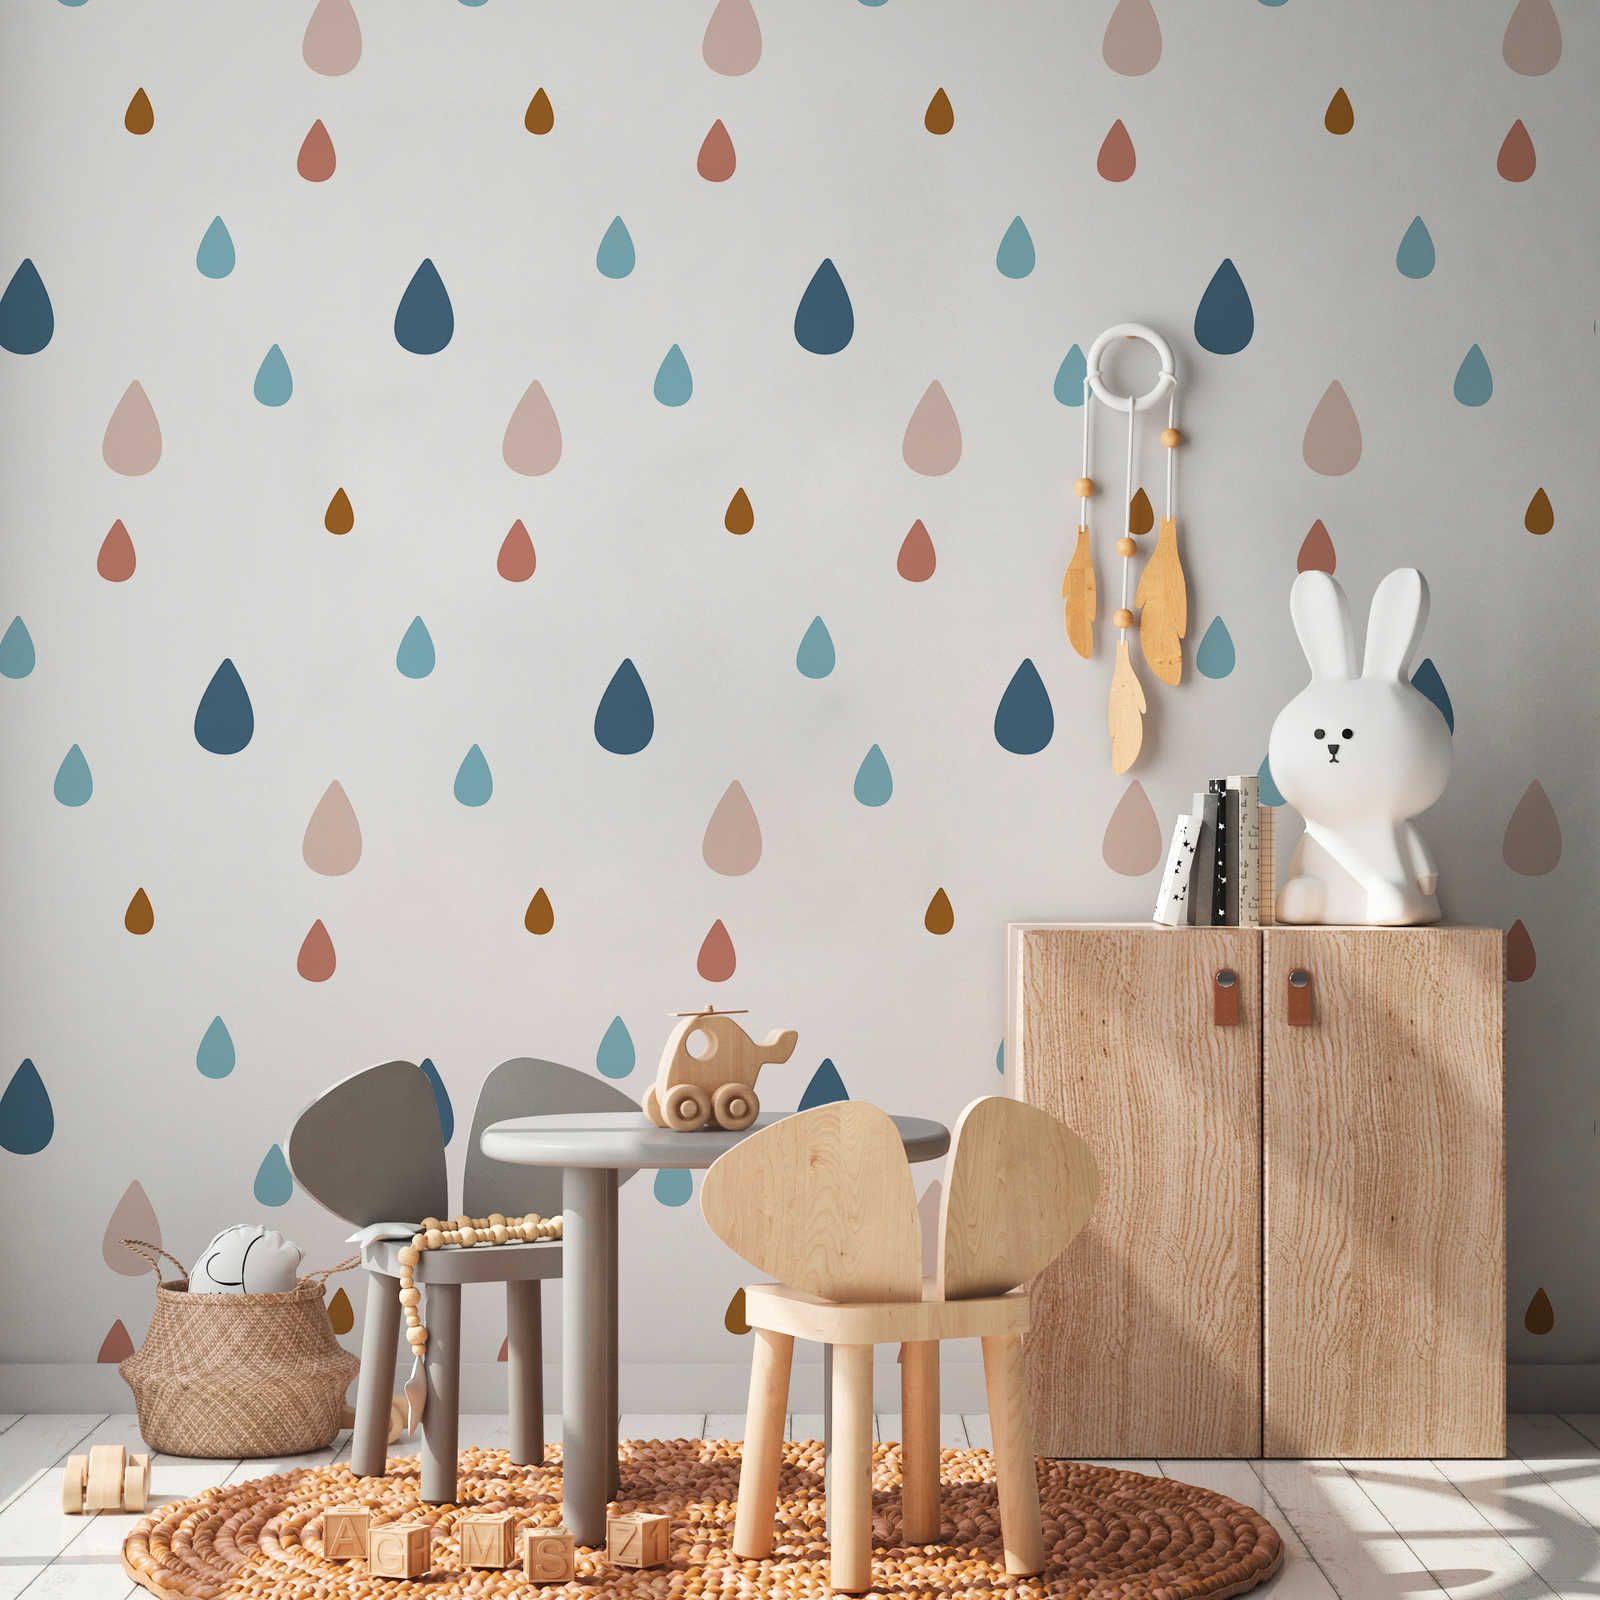 Children's Room Wallpaper with Colourful Water Drops - Textured non-woven
